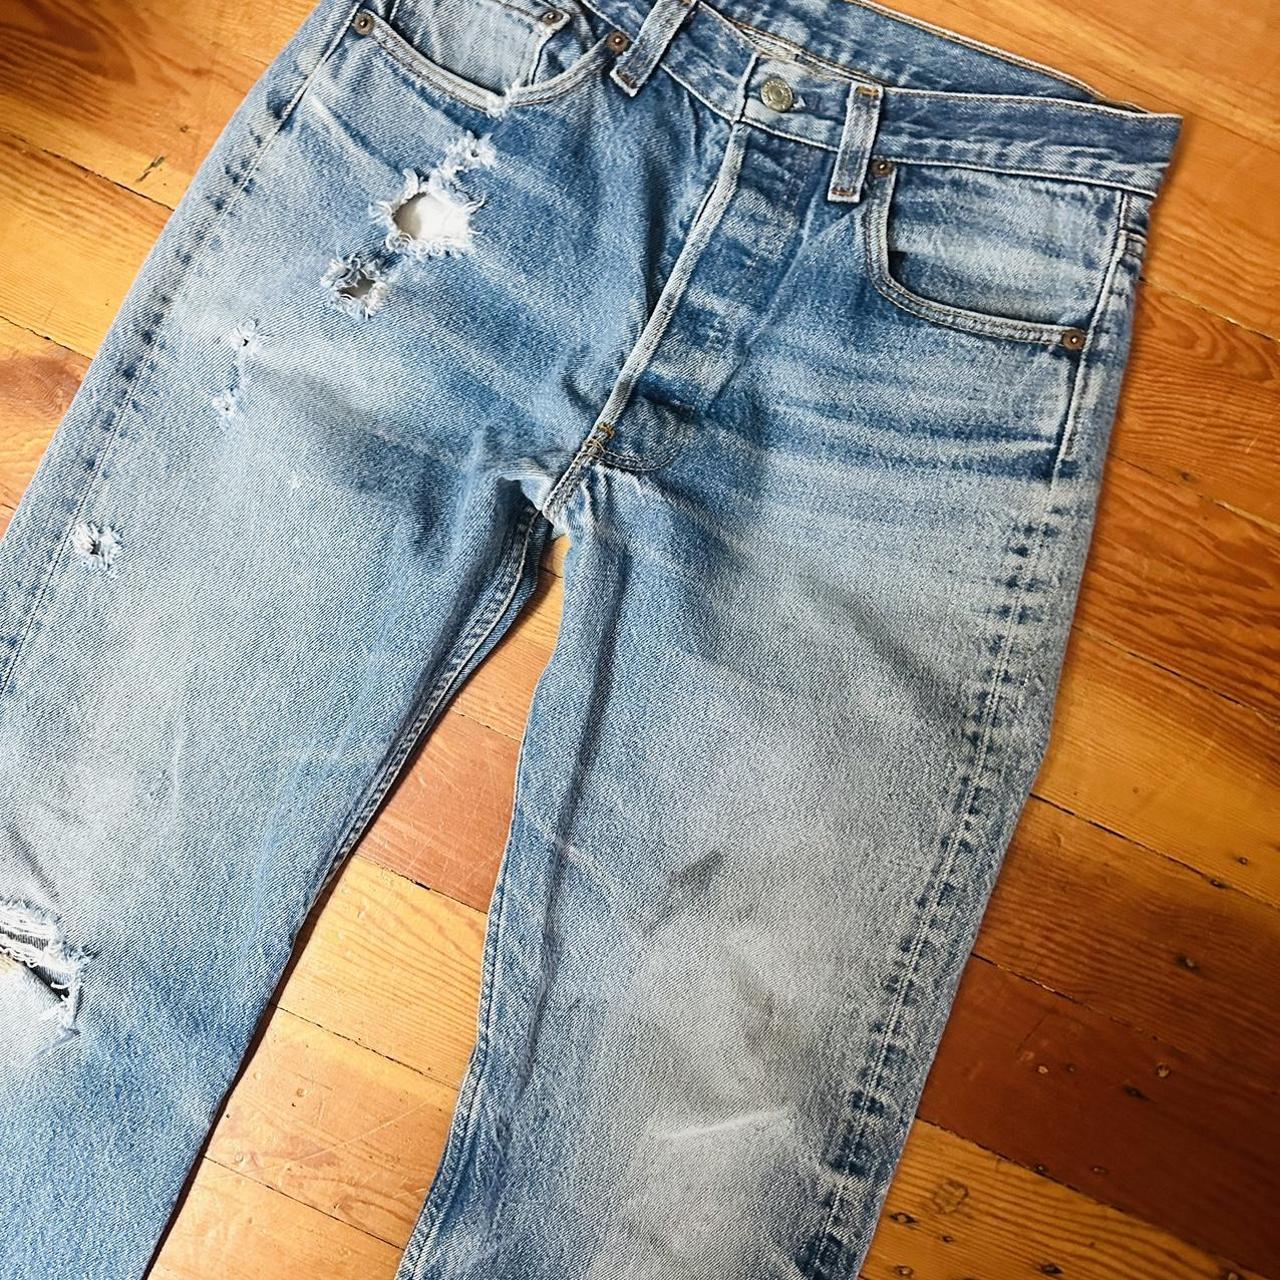 Vintage 501 Levi’s. This fade!!😍😍😍 beat up, holes,... - Depop